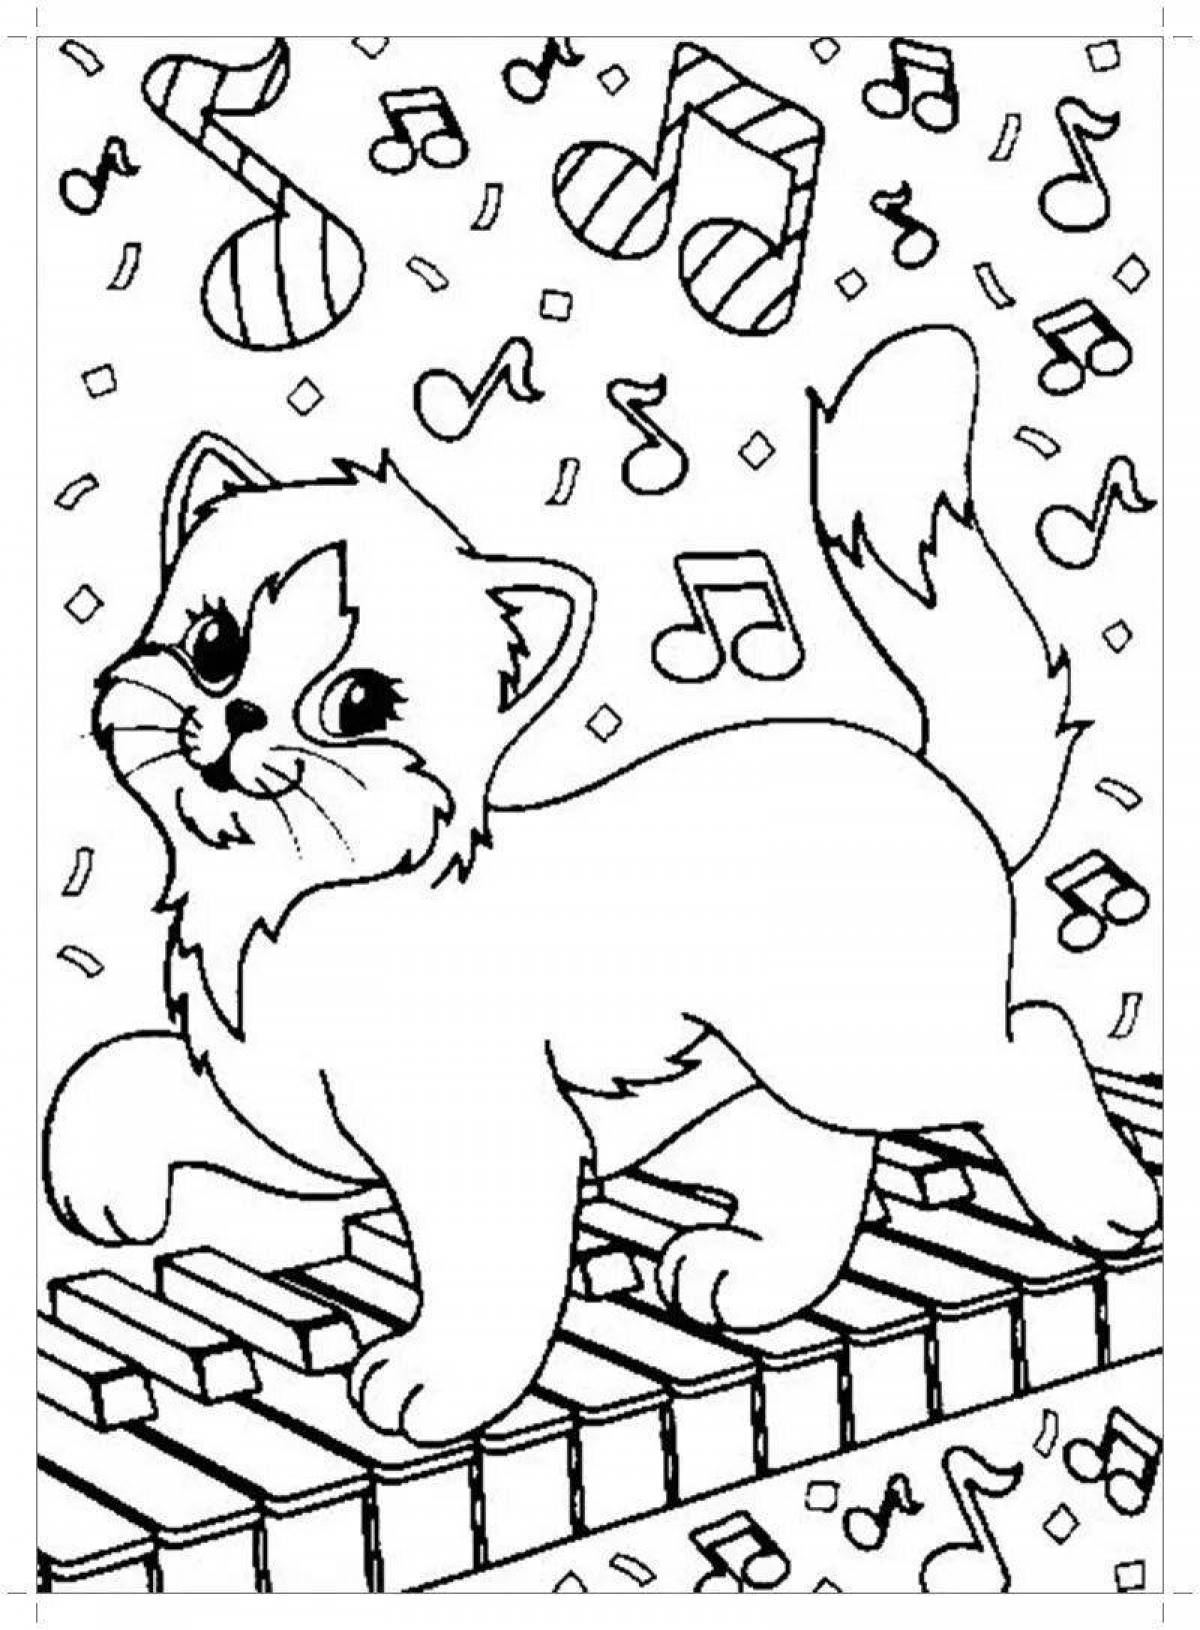 Sparkling coloring book 9 years old for girls cats